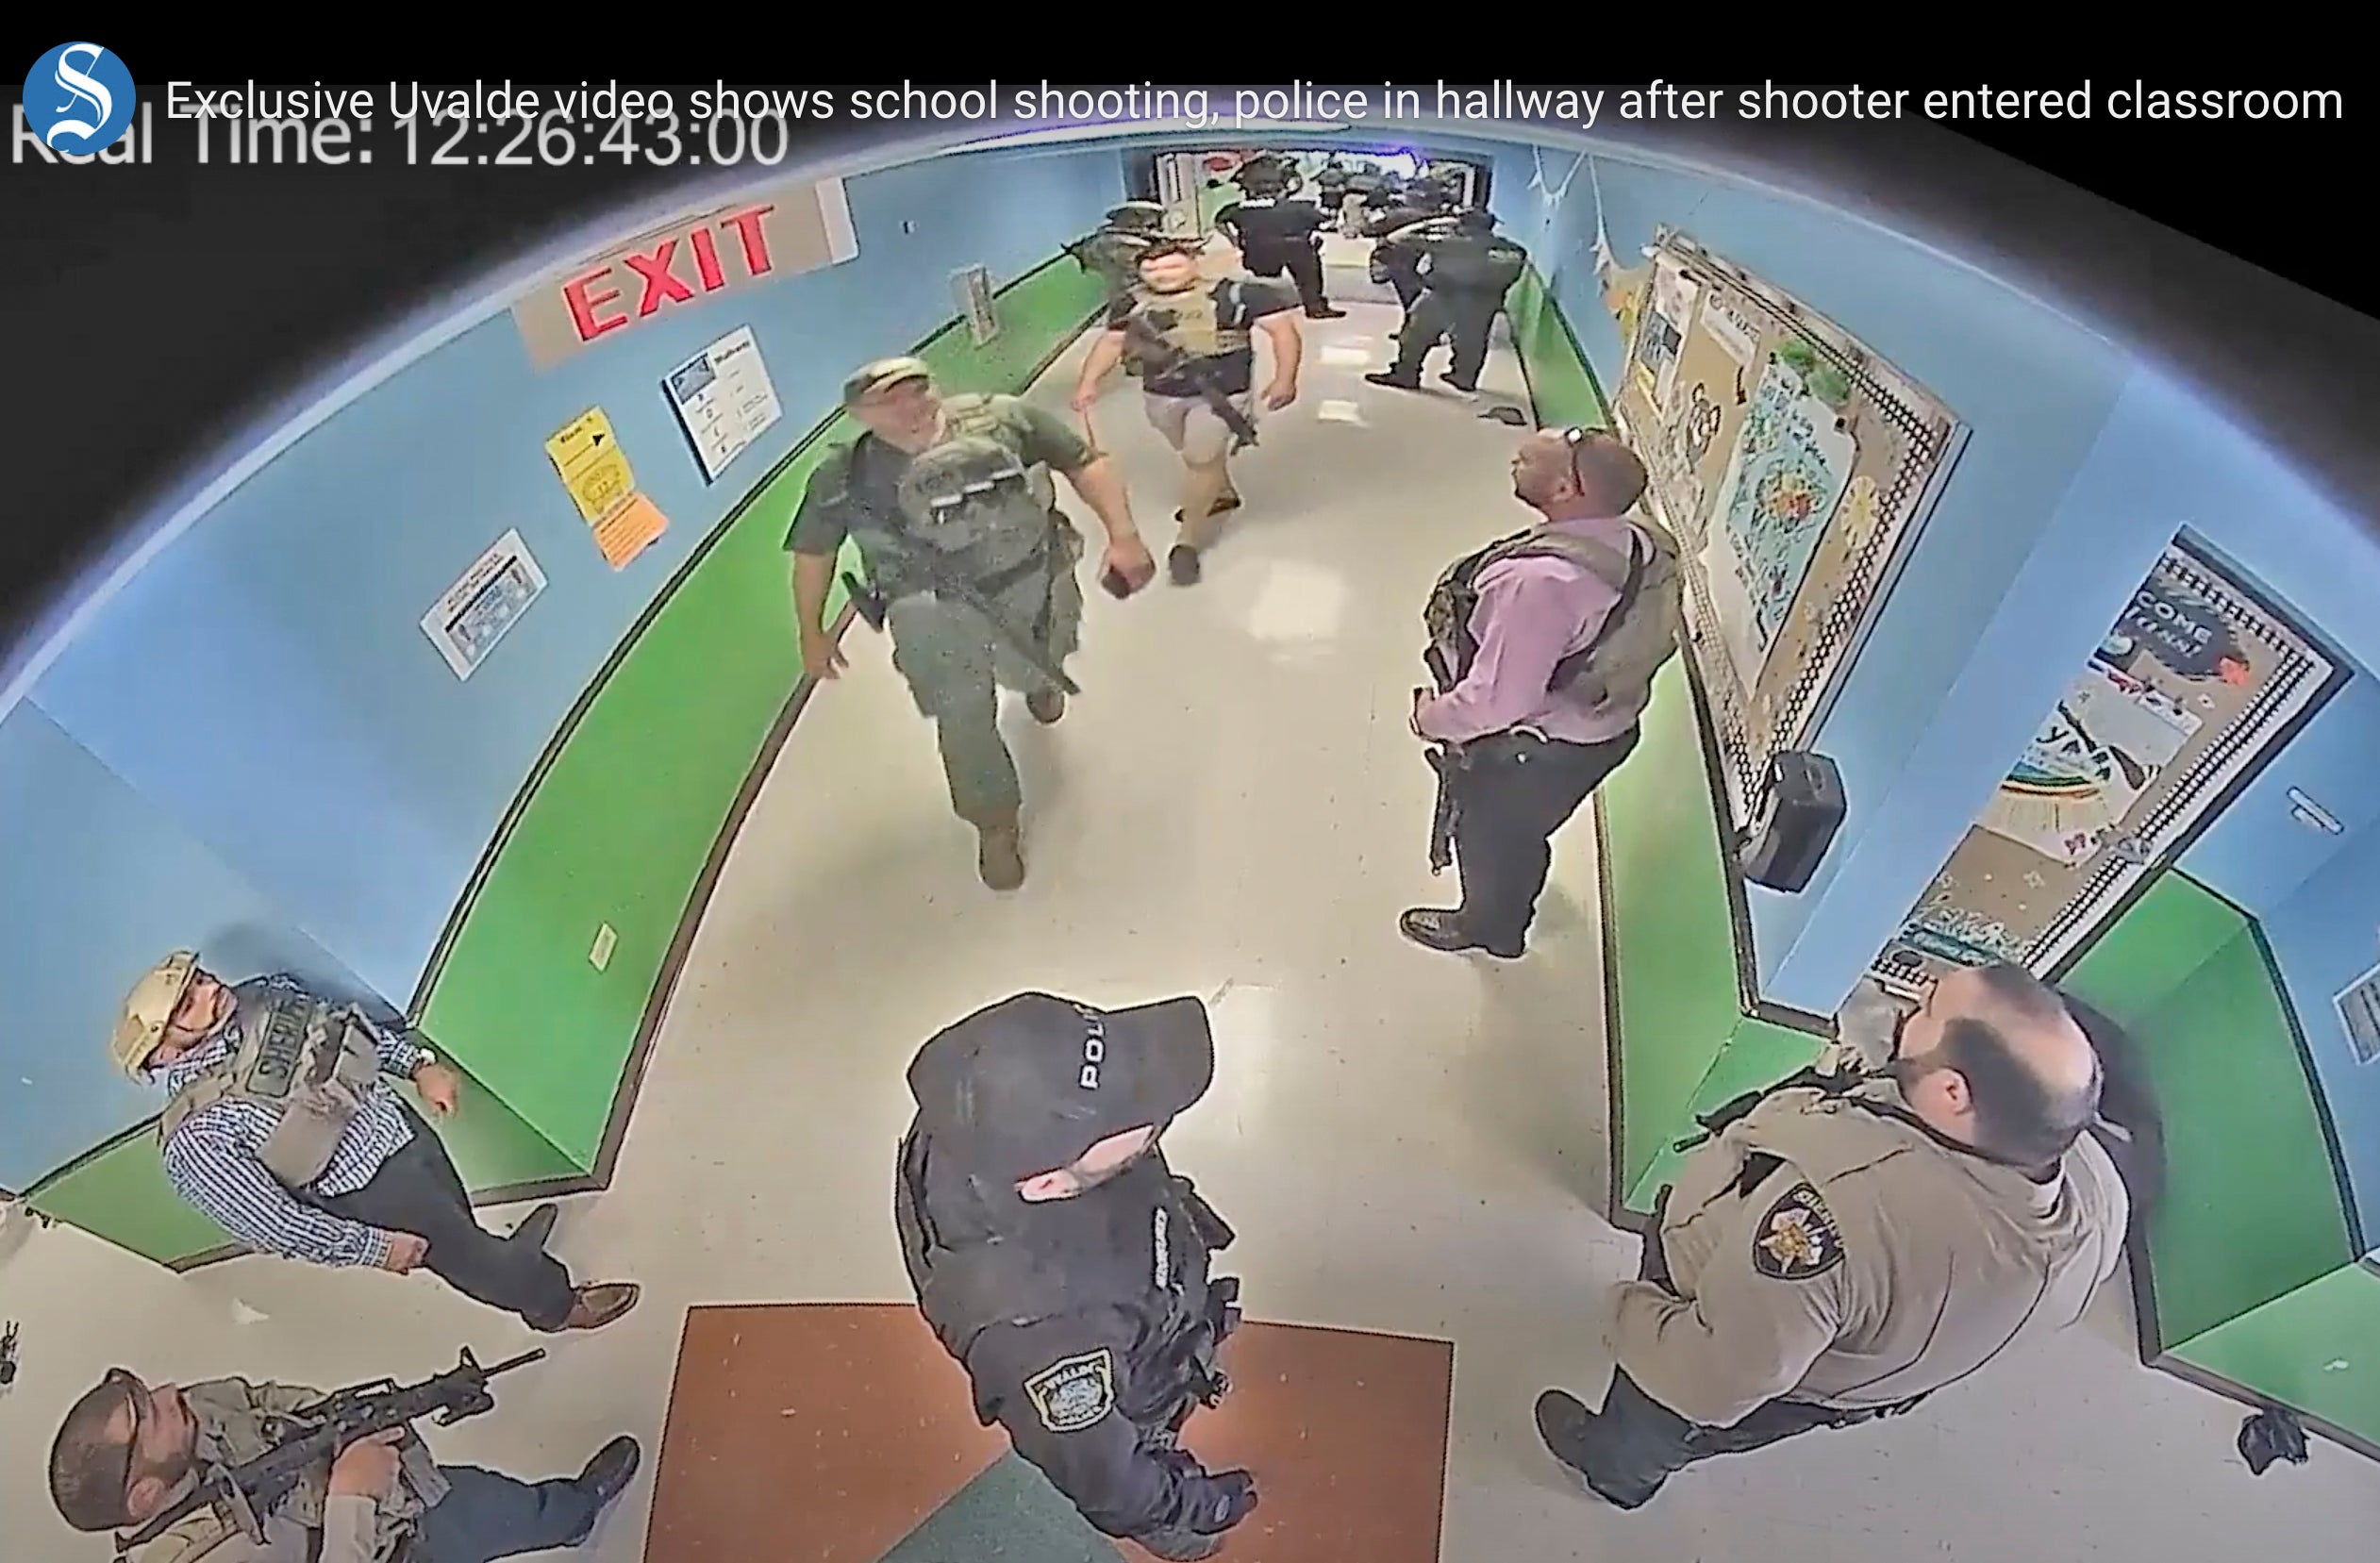 Video from the Uvalde, Texas shooting showed armed police officers waiting outside classrooms for over an hour while the shooter continued his massacre